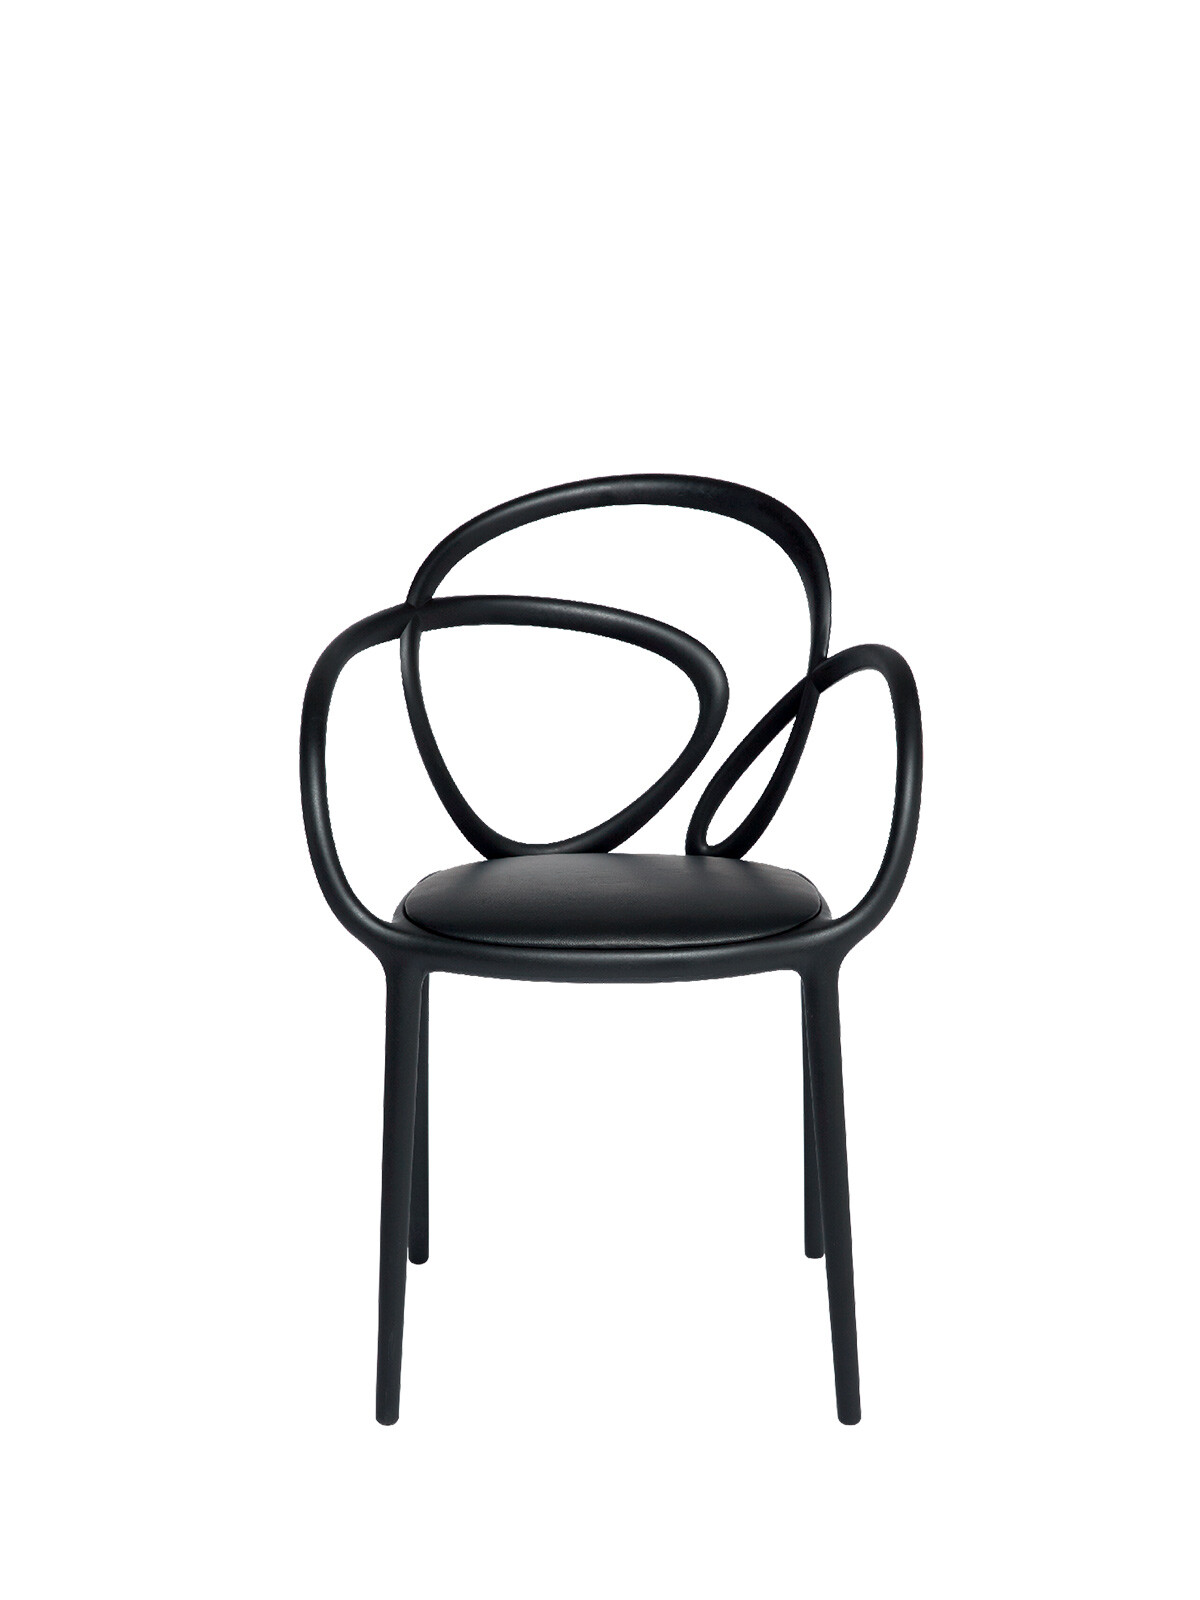 Loop chair black with cuschion NEGRO